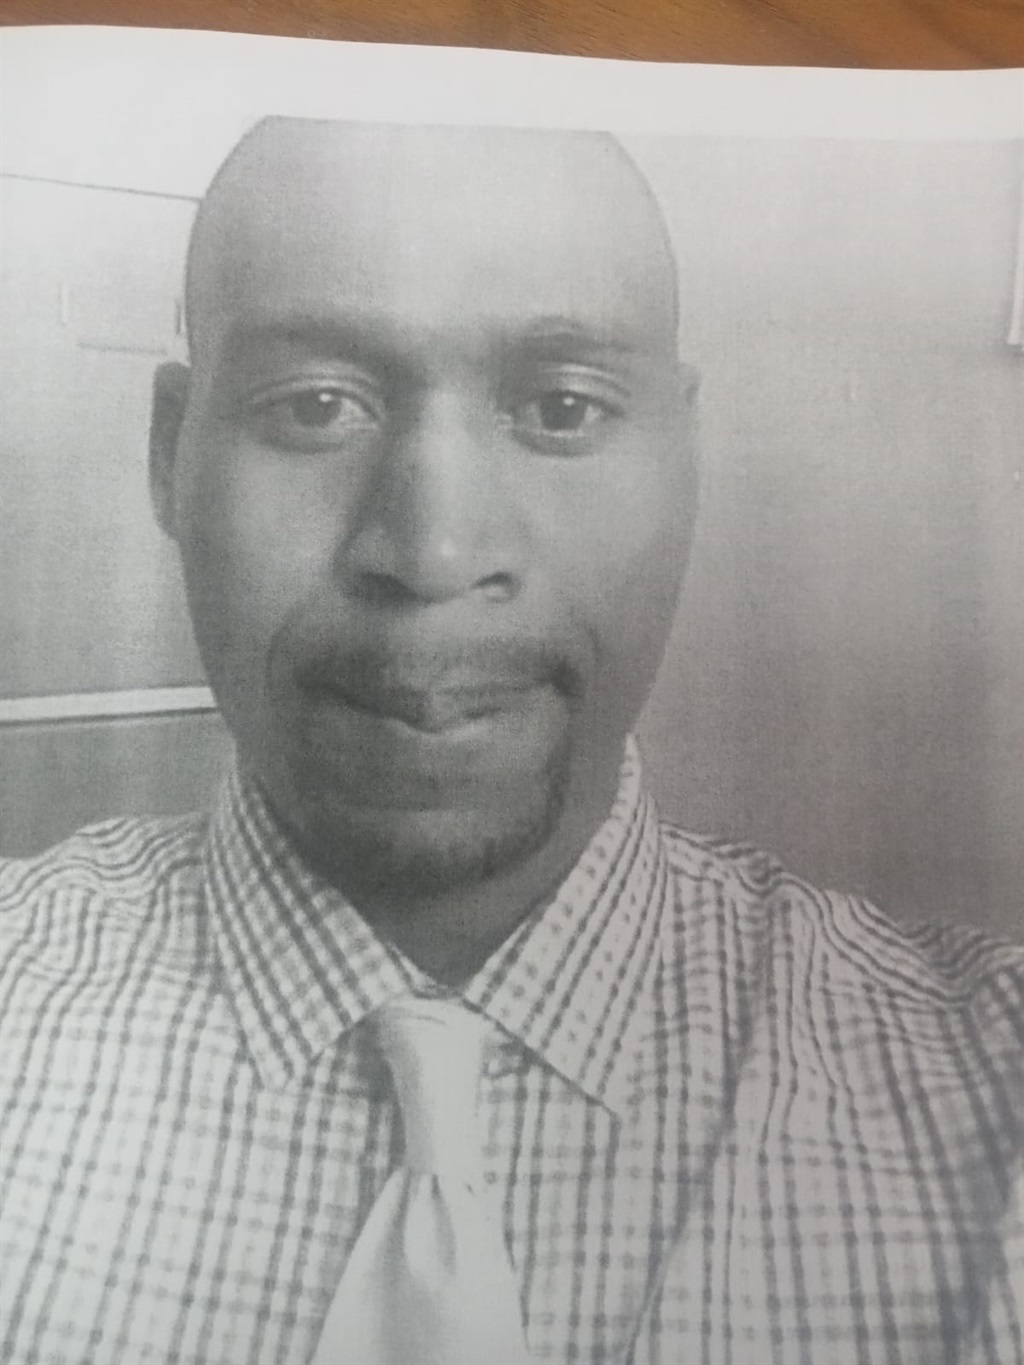 Help cops to find the missing Detective Dumisani Solomon Mtshali, who went missing on Sunday.